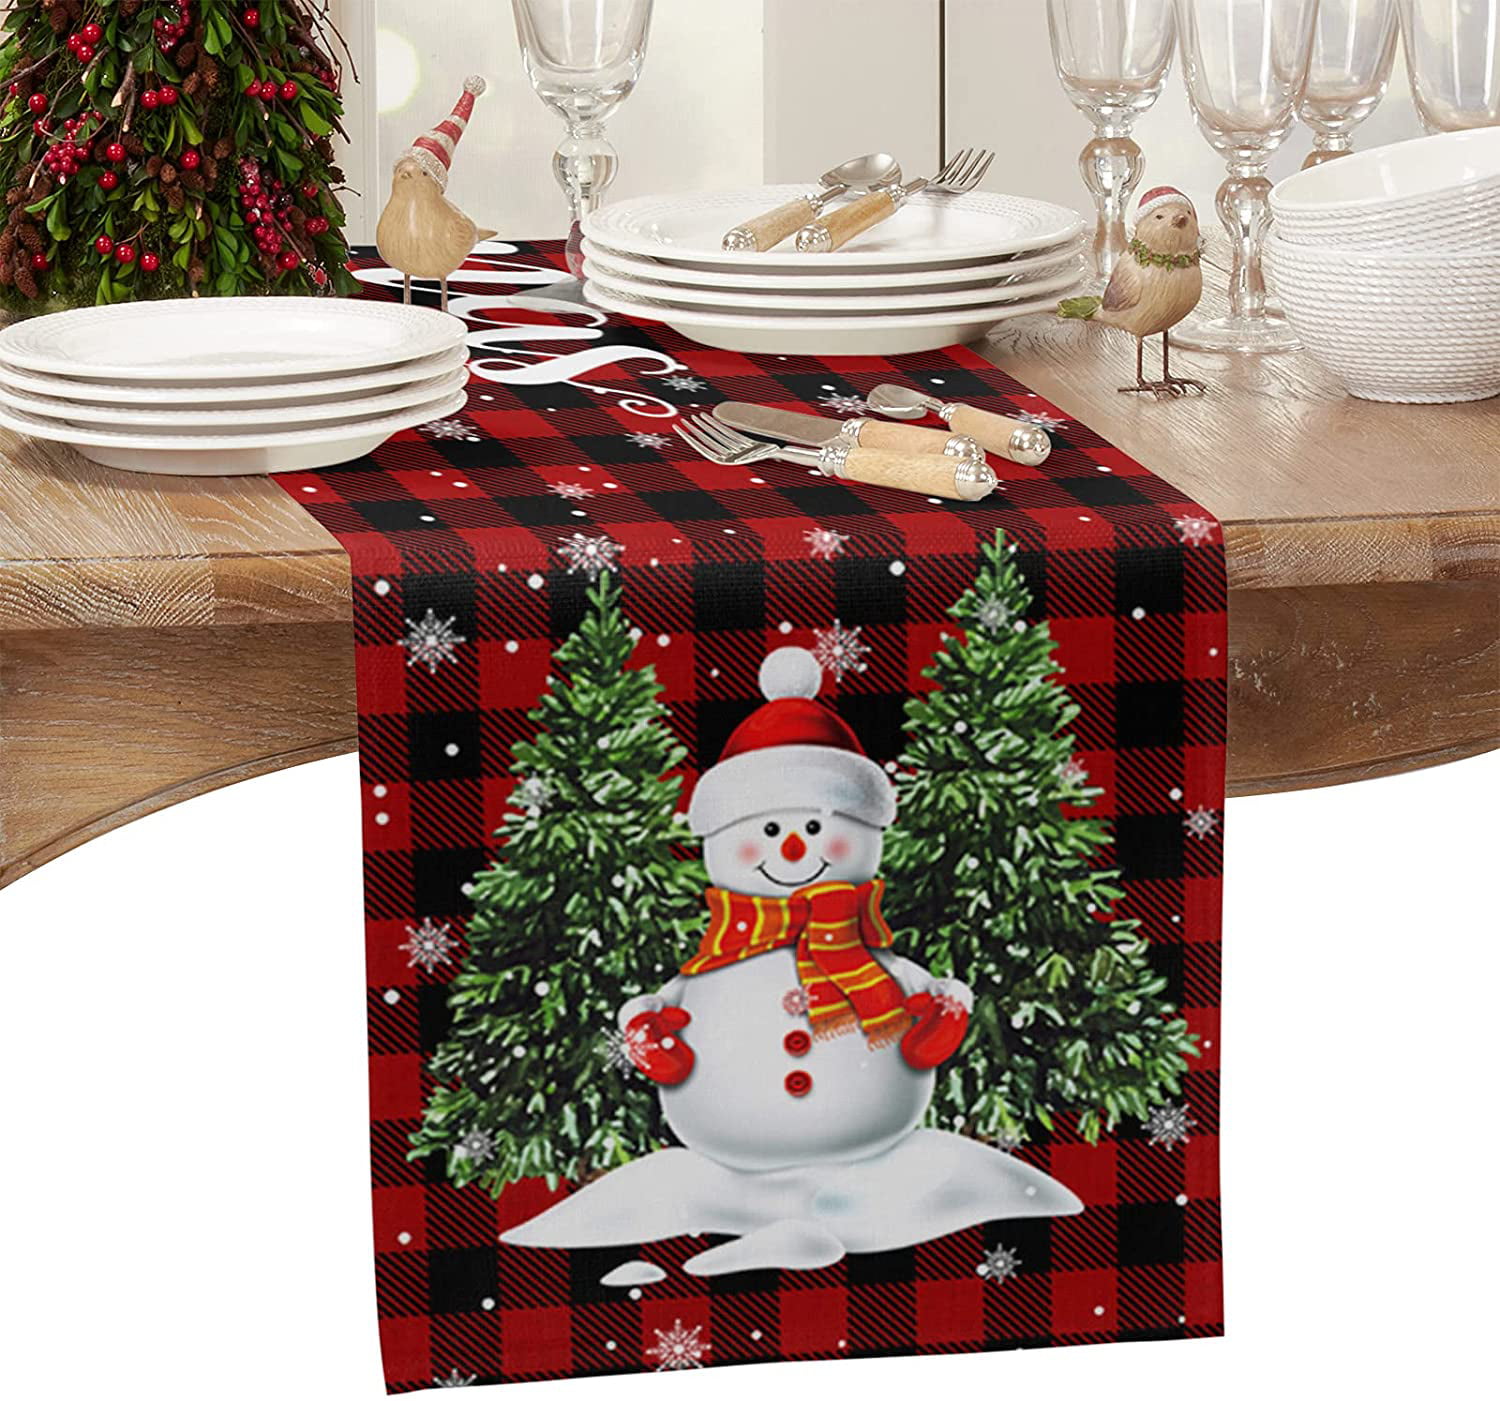 Falling Snowflake TABLE RUNNER 72" x 20" Red White CHRISTMAS 100% cotton 